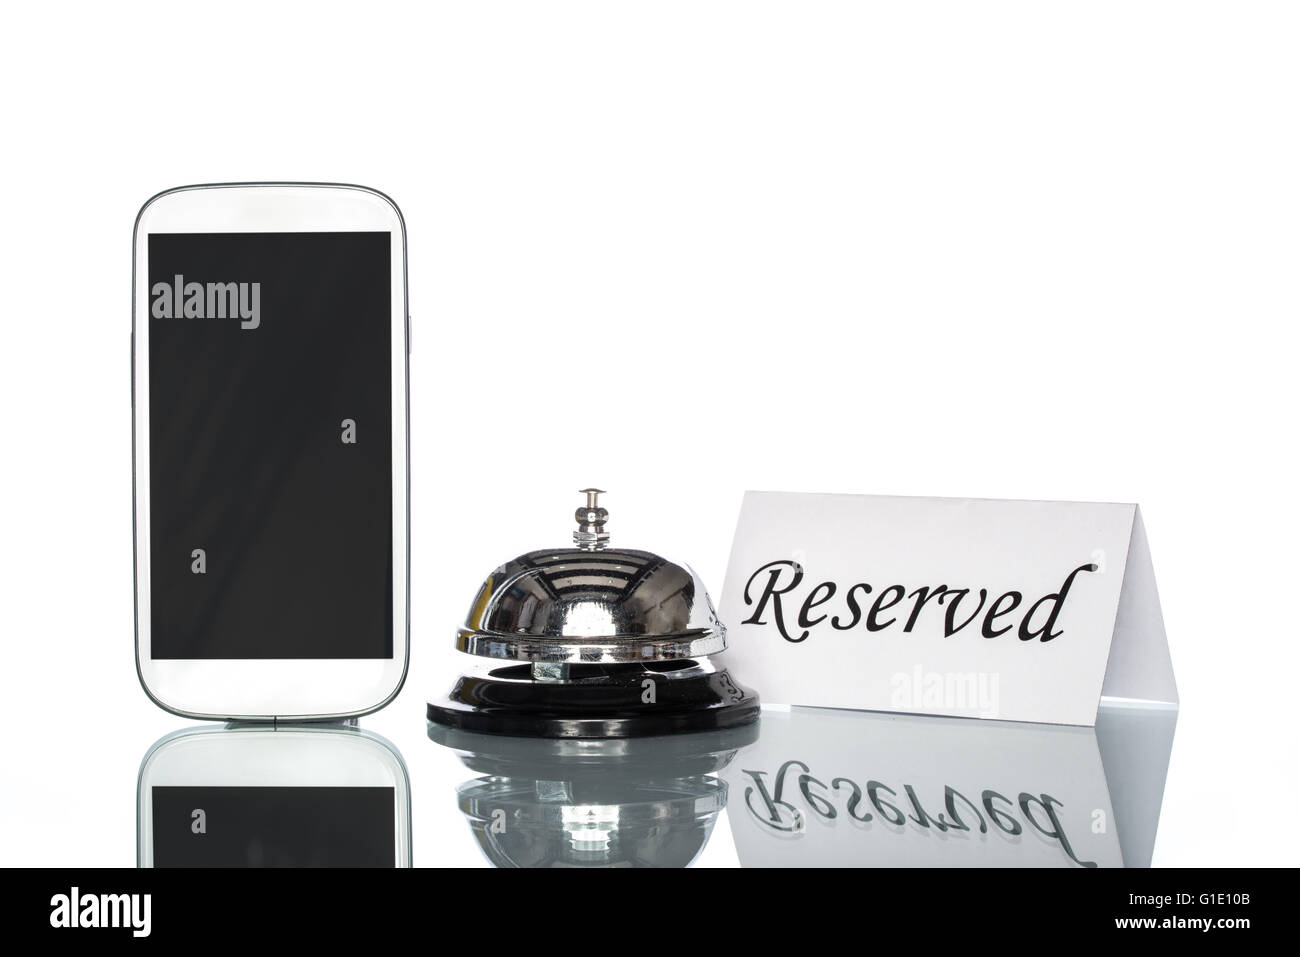 cell phone and Service bell on white background, reserved Stock Photo